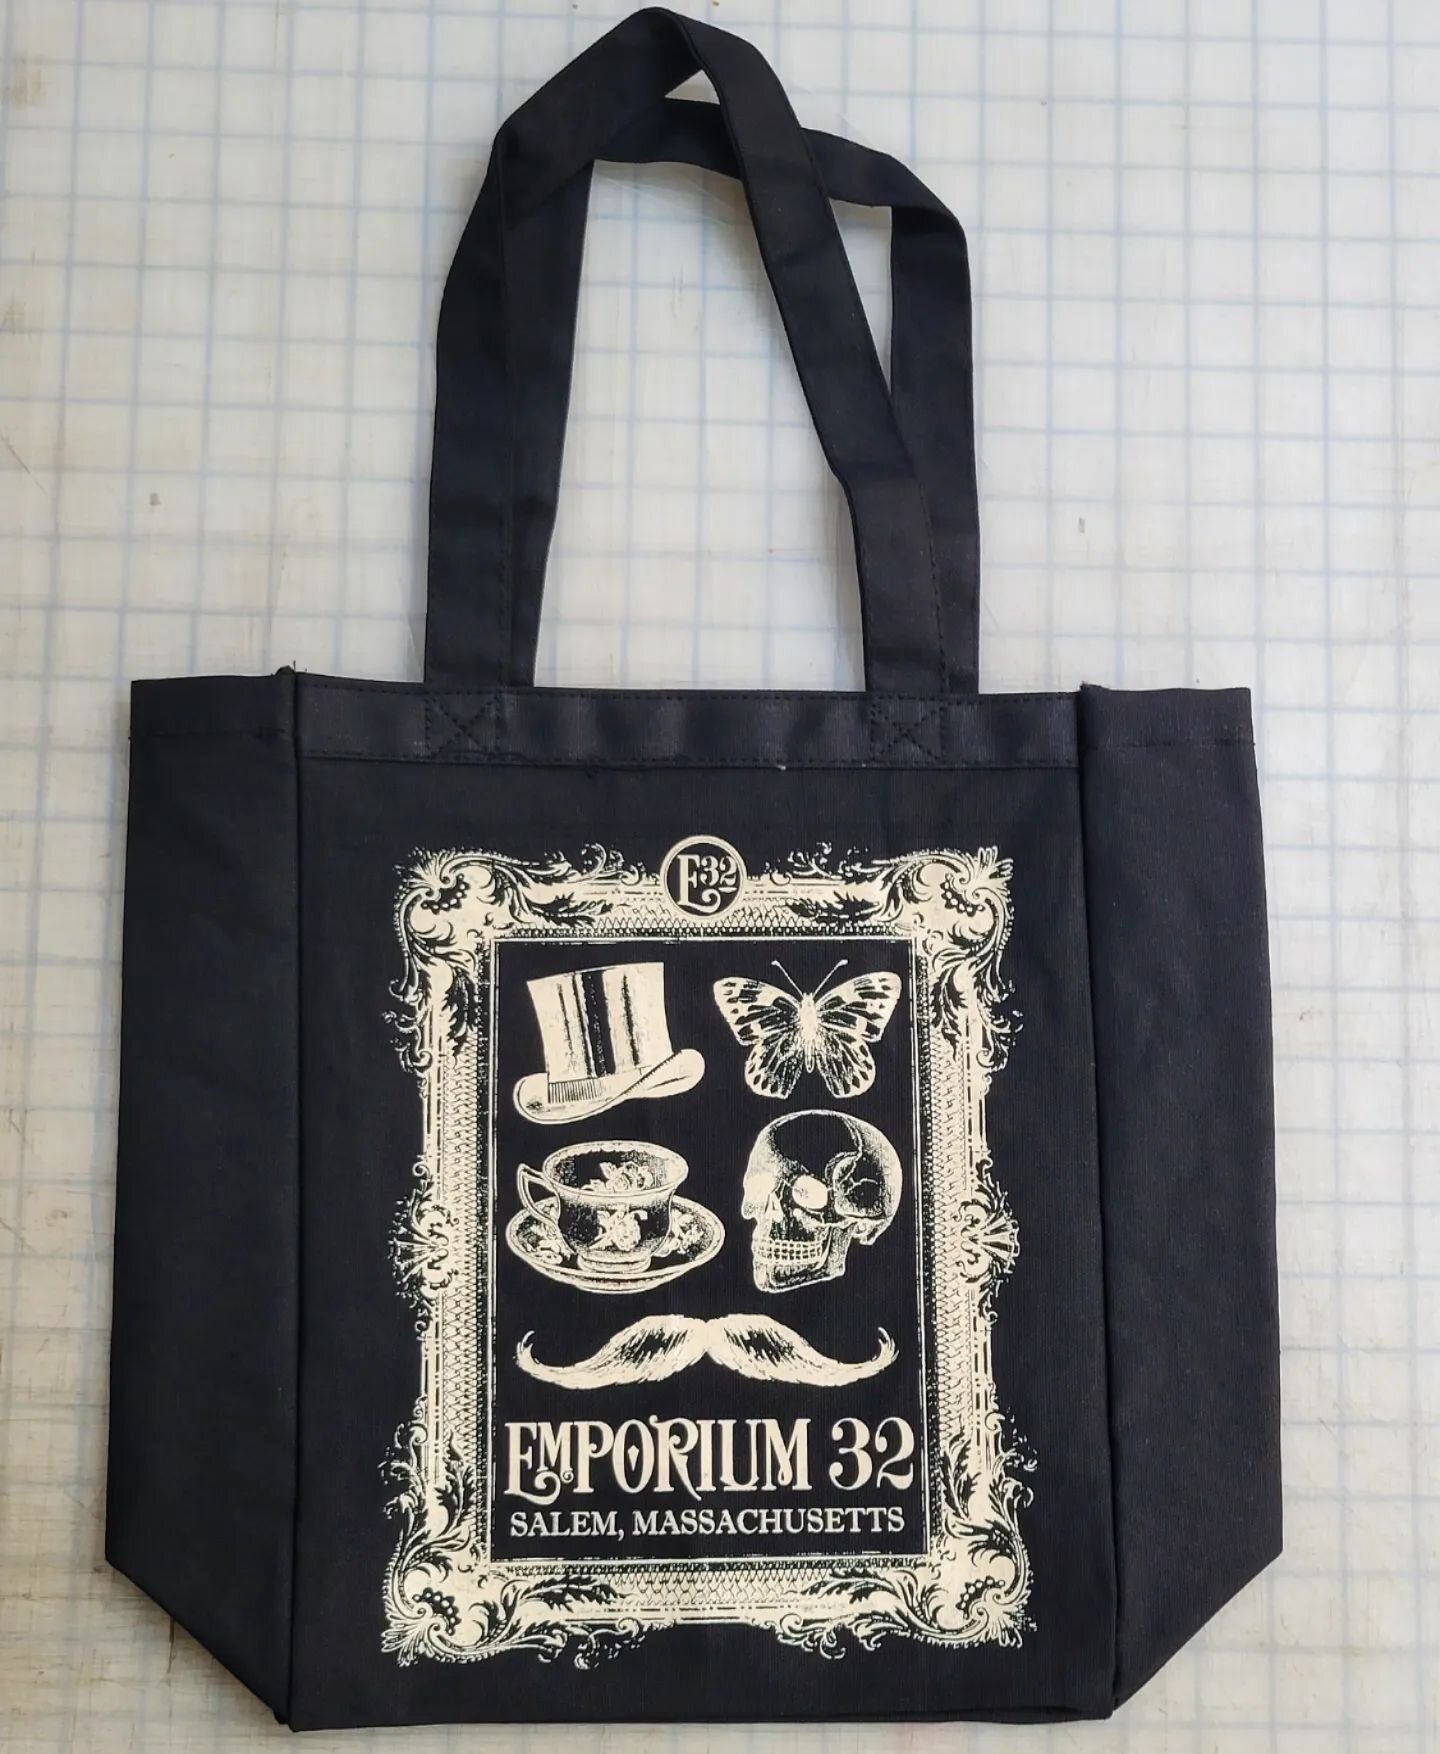 These bags for @emporium32 are totes amazing! All puns aside, we got this sick design in the bag.

Tags:
#gorilla #gorillasalem #gorillaprinting #salem #salemma #salemmass #salemmassachusetts #salemgorilla #screenprinting #tote #totebag #totebags #ba